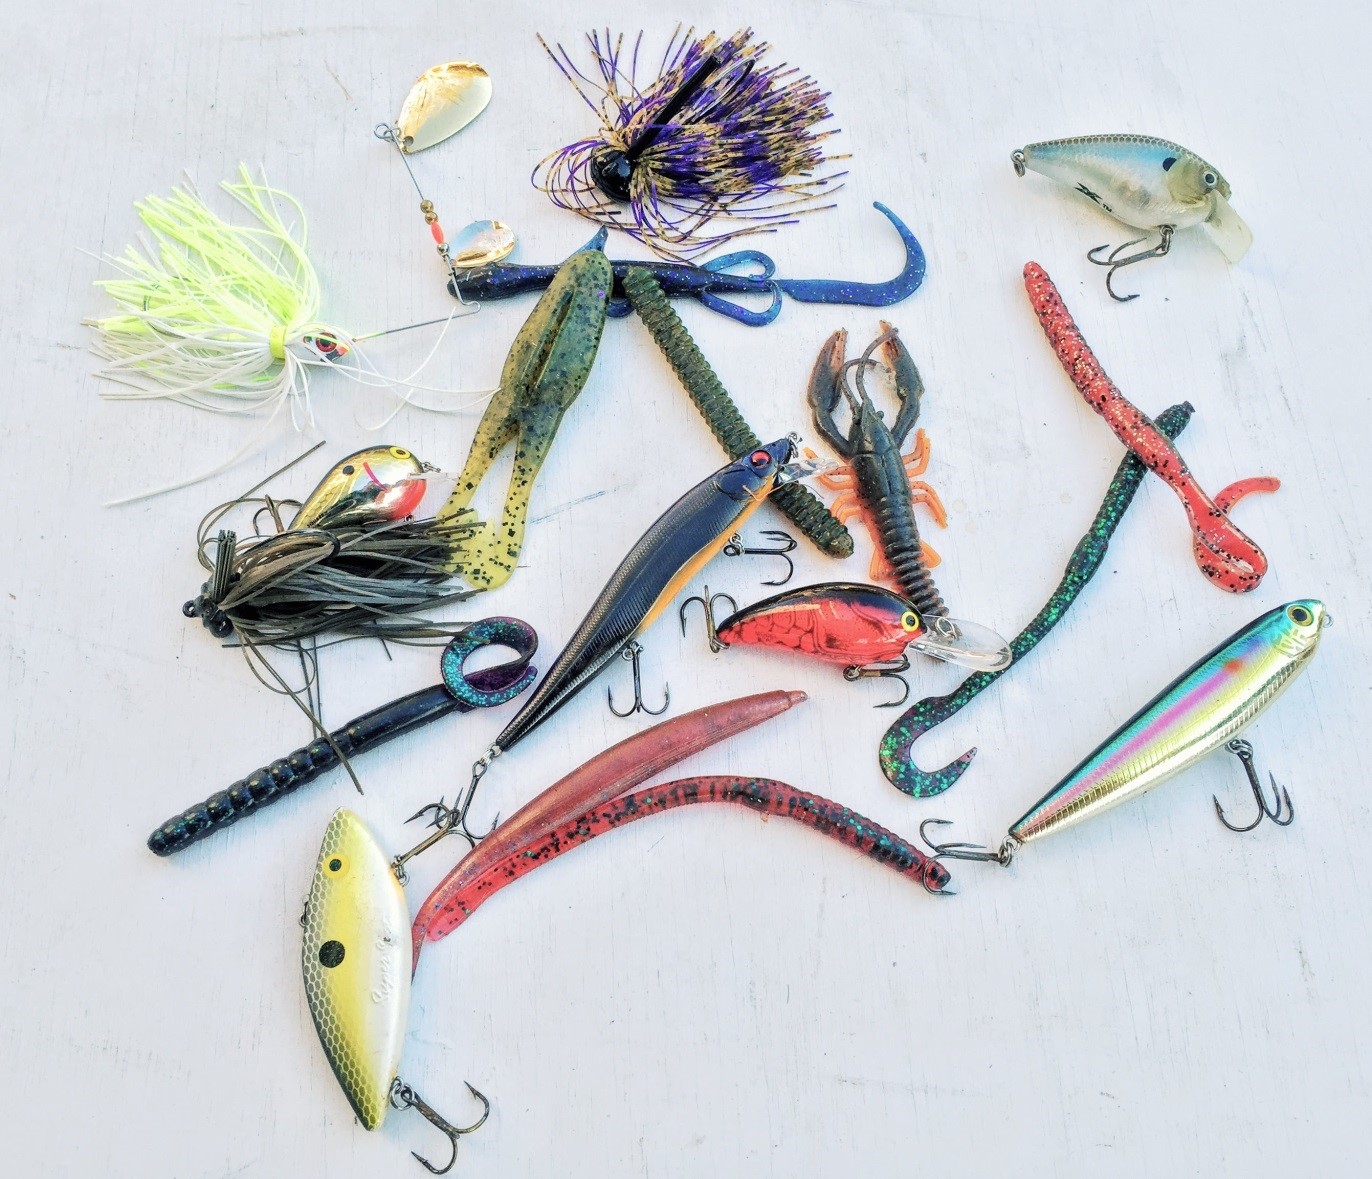 Lipless crankbaits key to fishermen catching more March bass